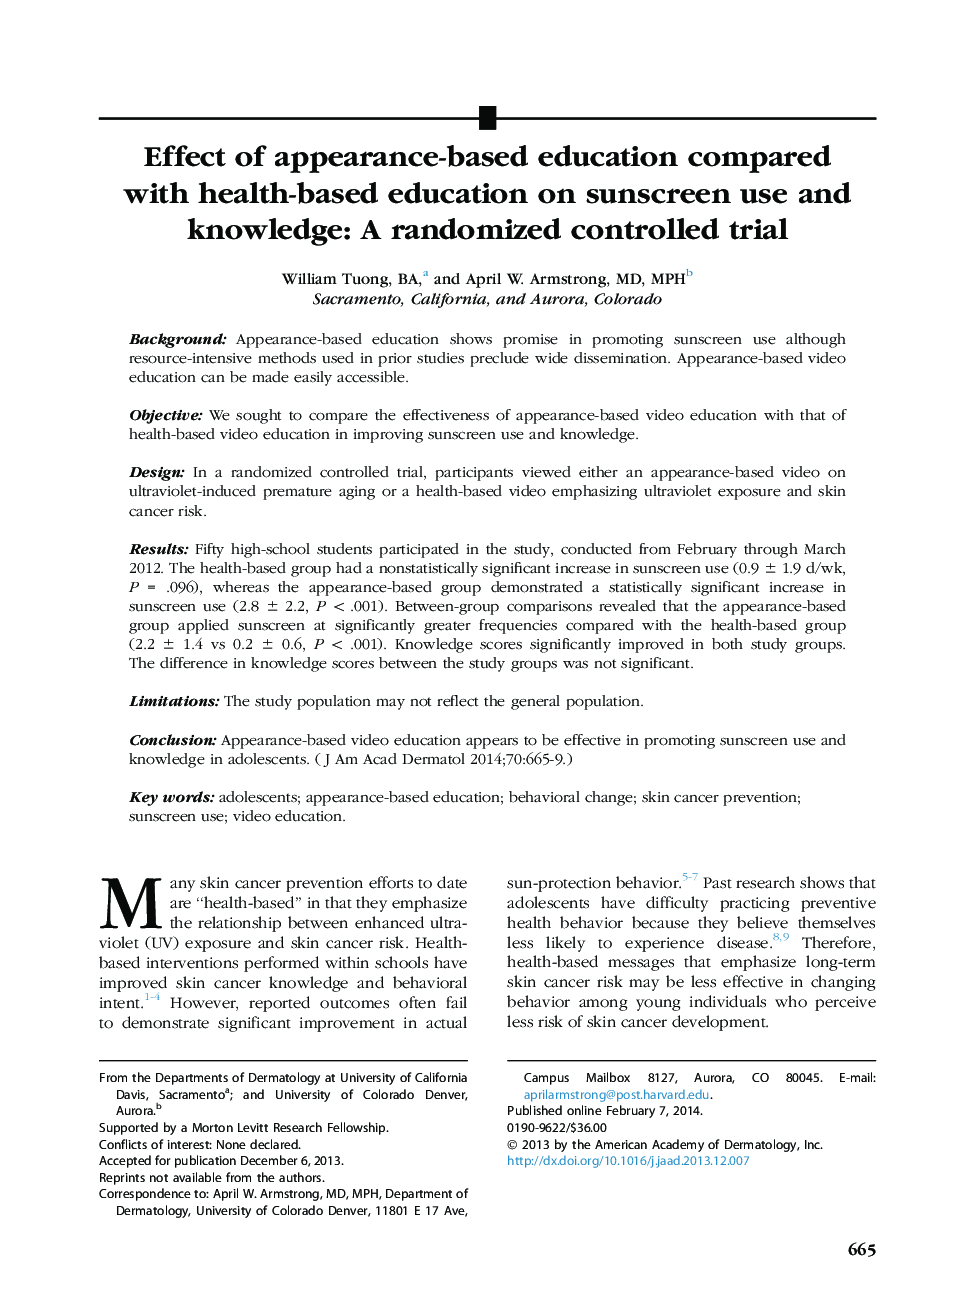 Original articleEffect of appearance-based education compared withÂ health-based education on sunscreen use and knowledge: A randomized controlled trial